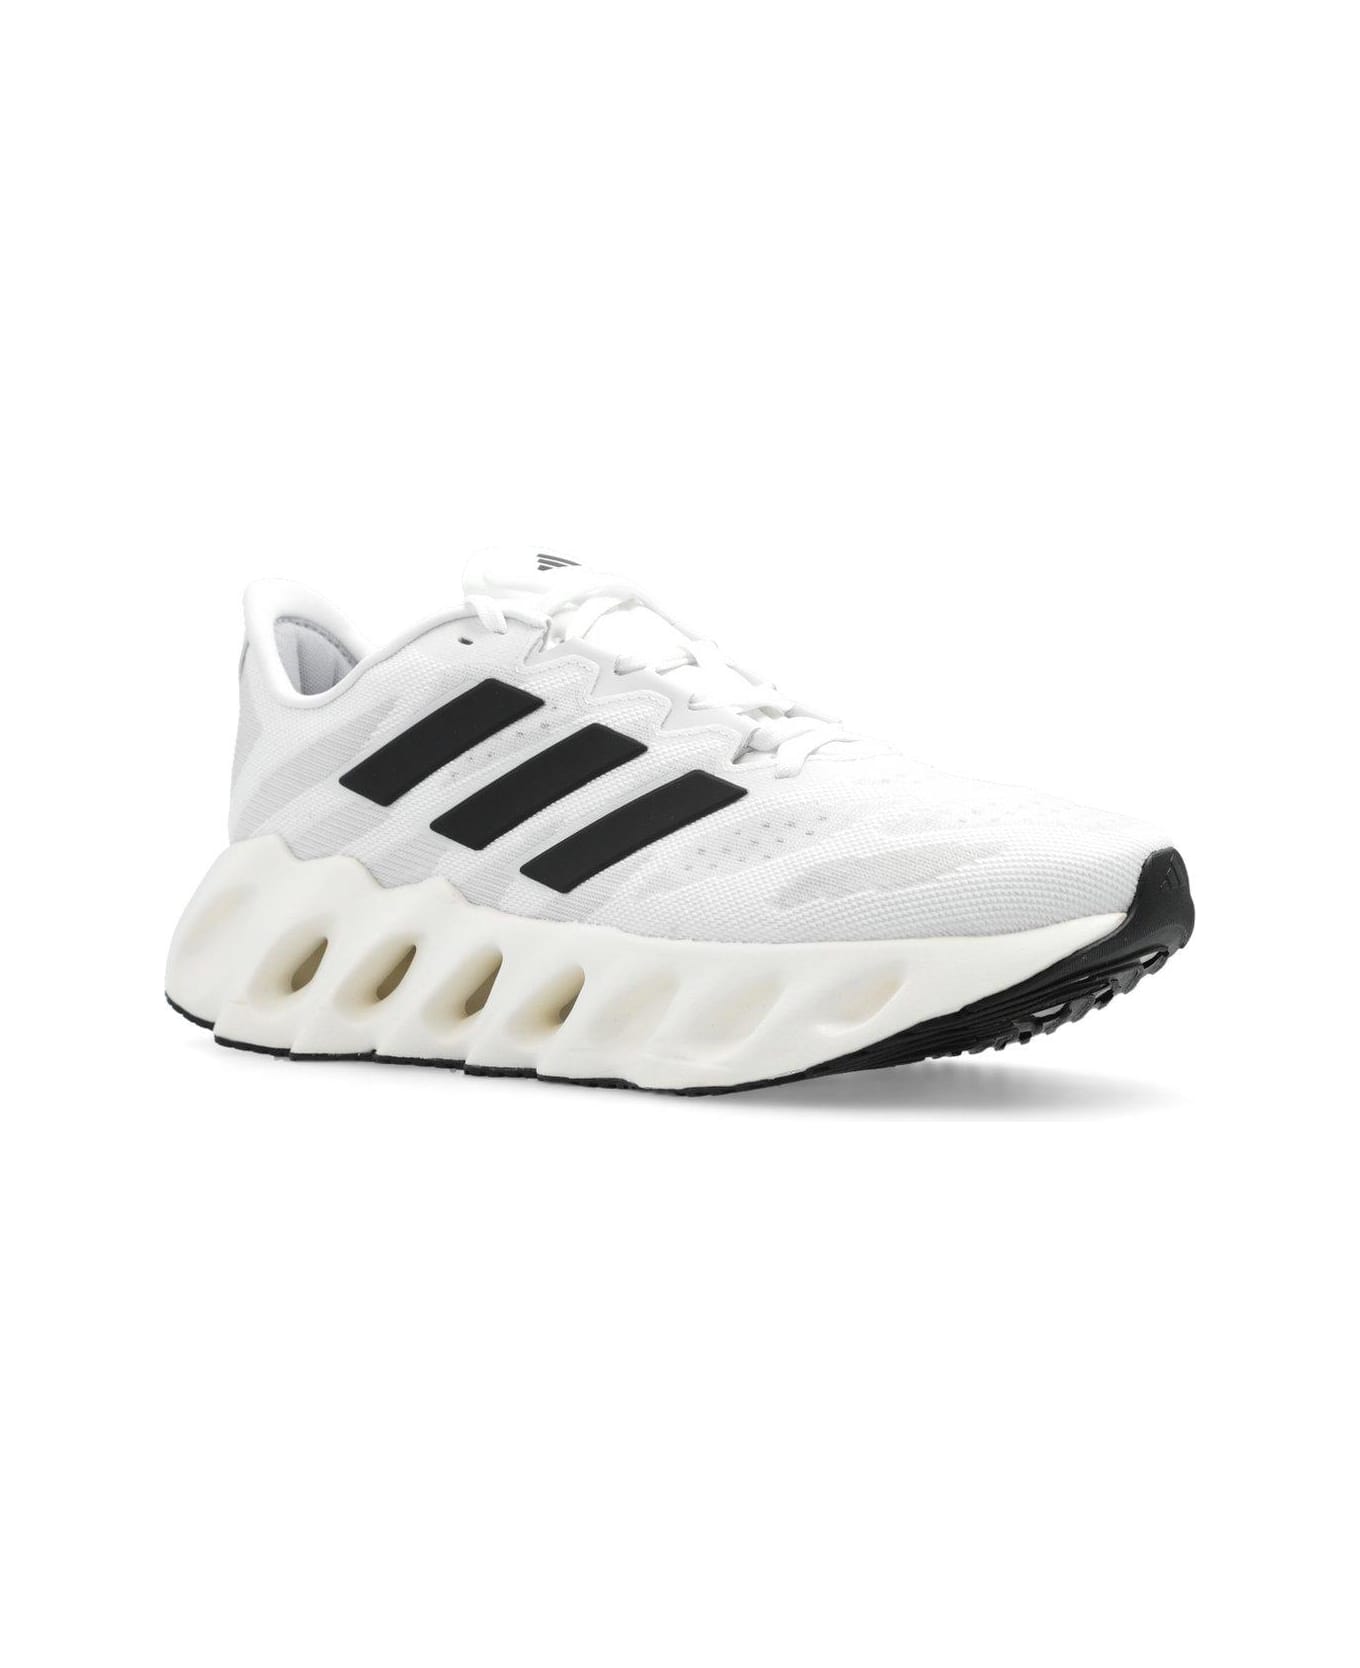 Adidas Switch Fwd Running Sneakers スニーカー